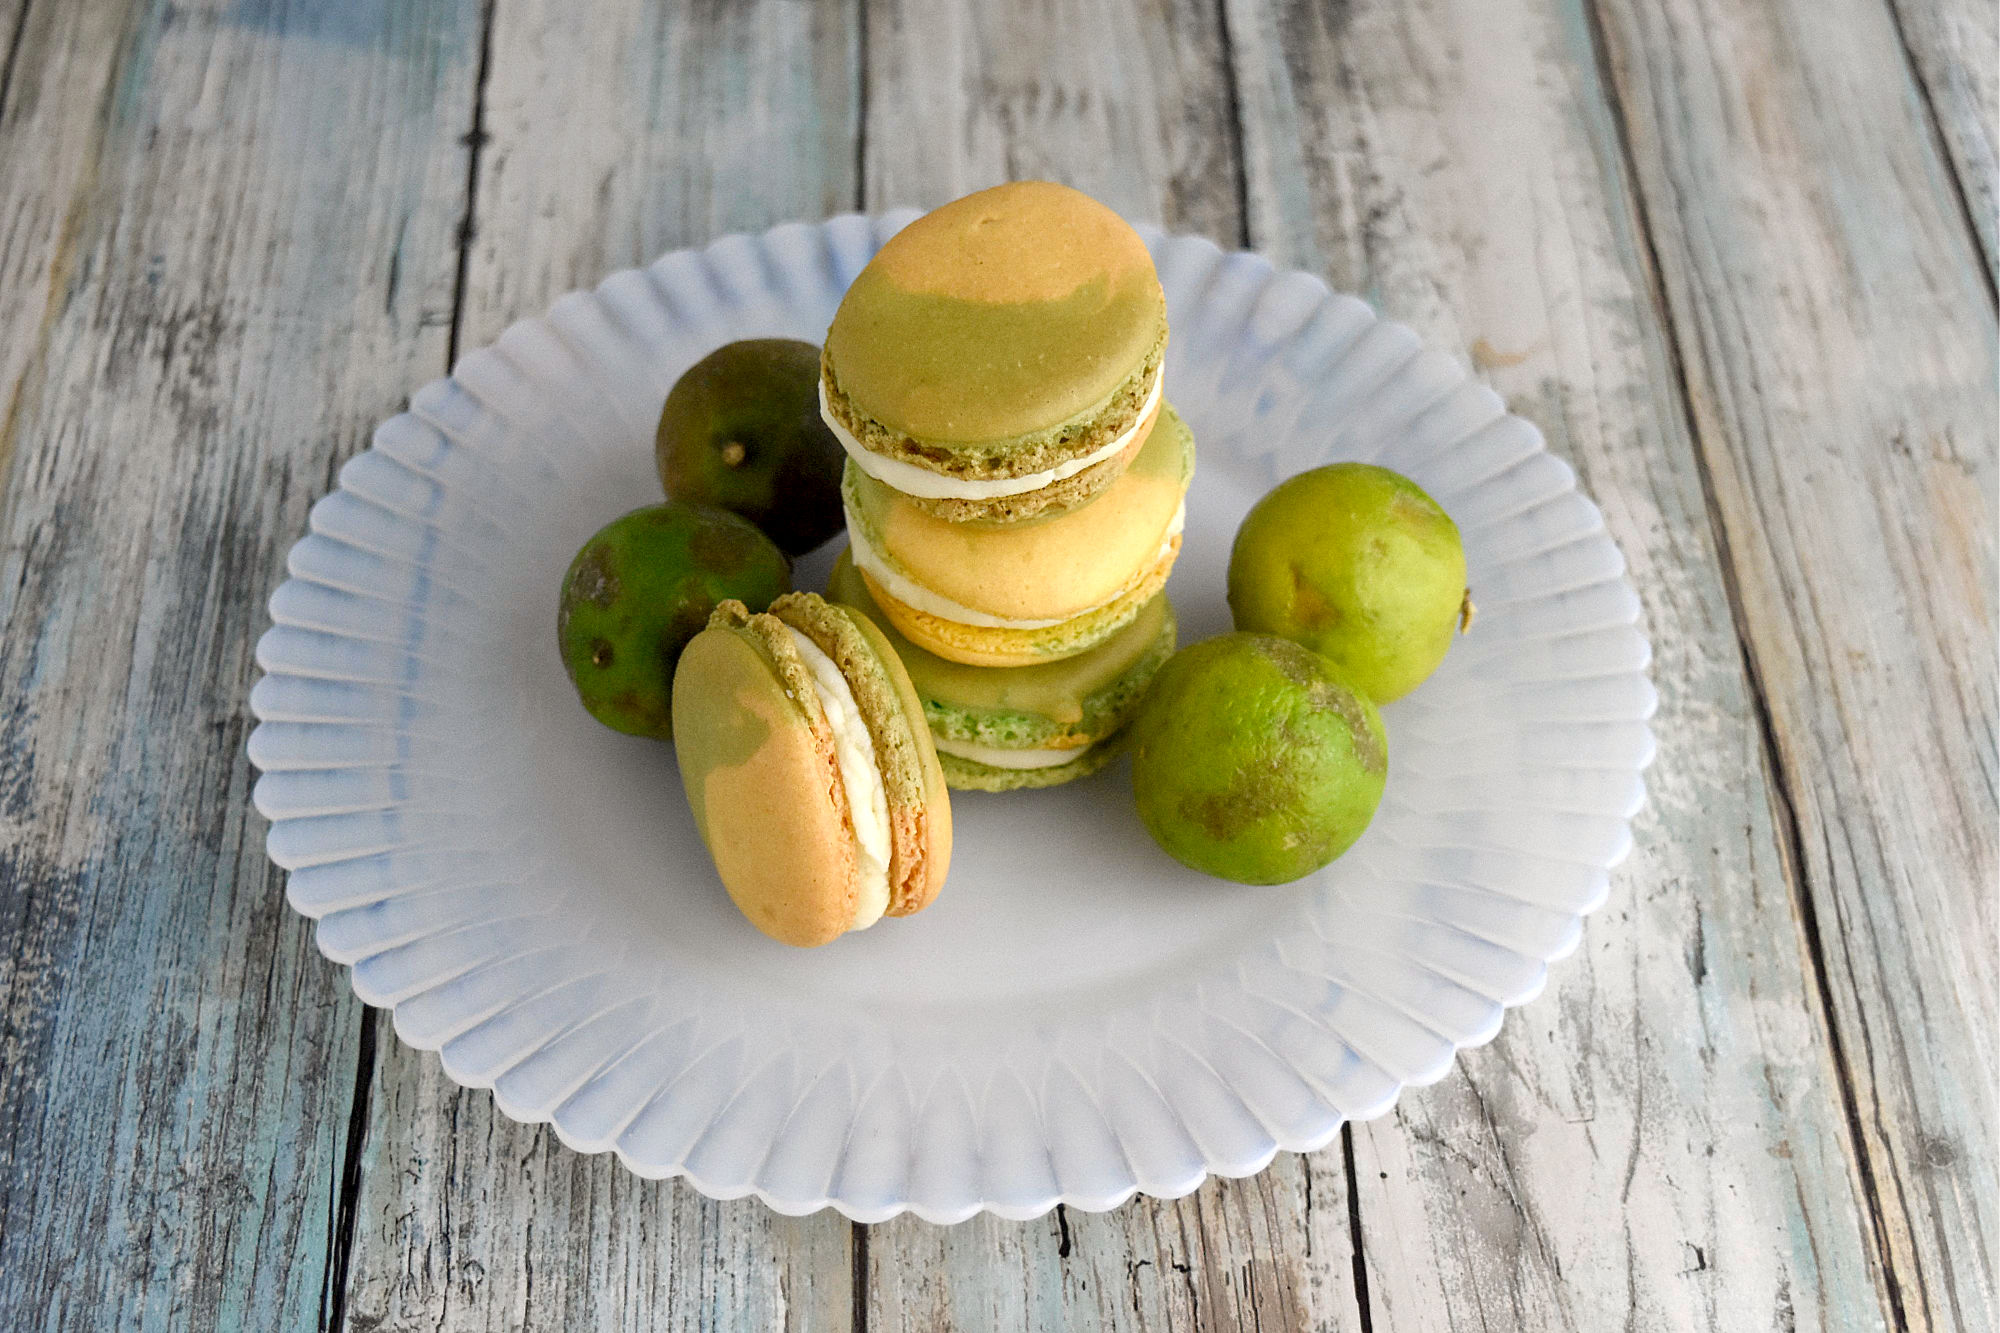 Lemon Lime Macaron have lemon in the shells and key lime buttercream filling.  They're the perfect sweet tart treat.